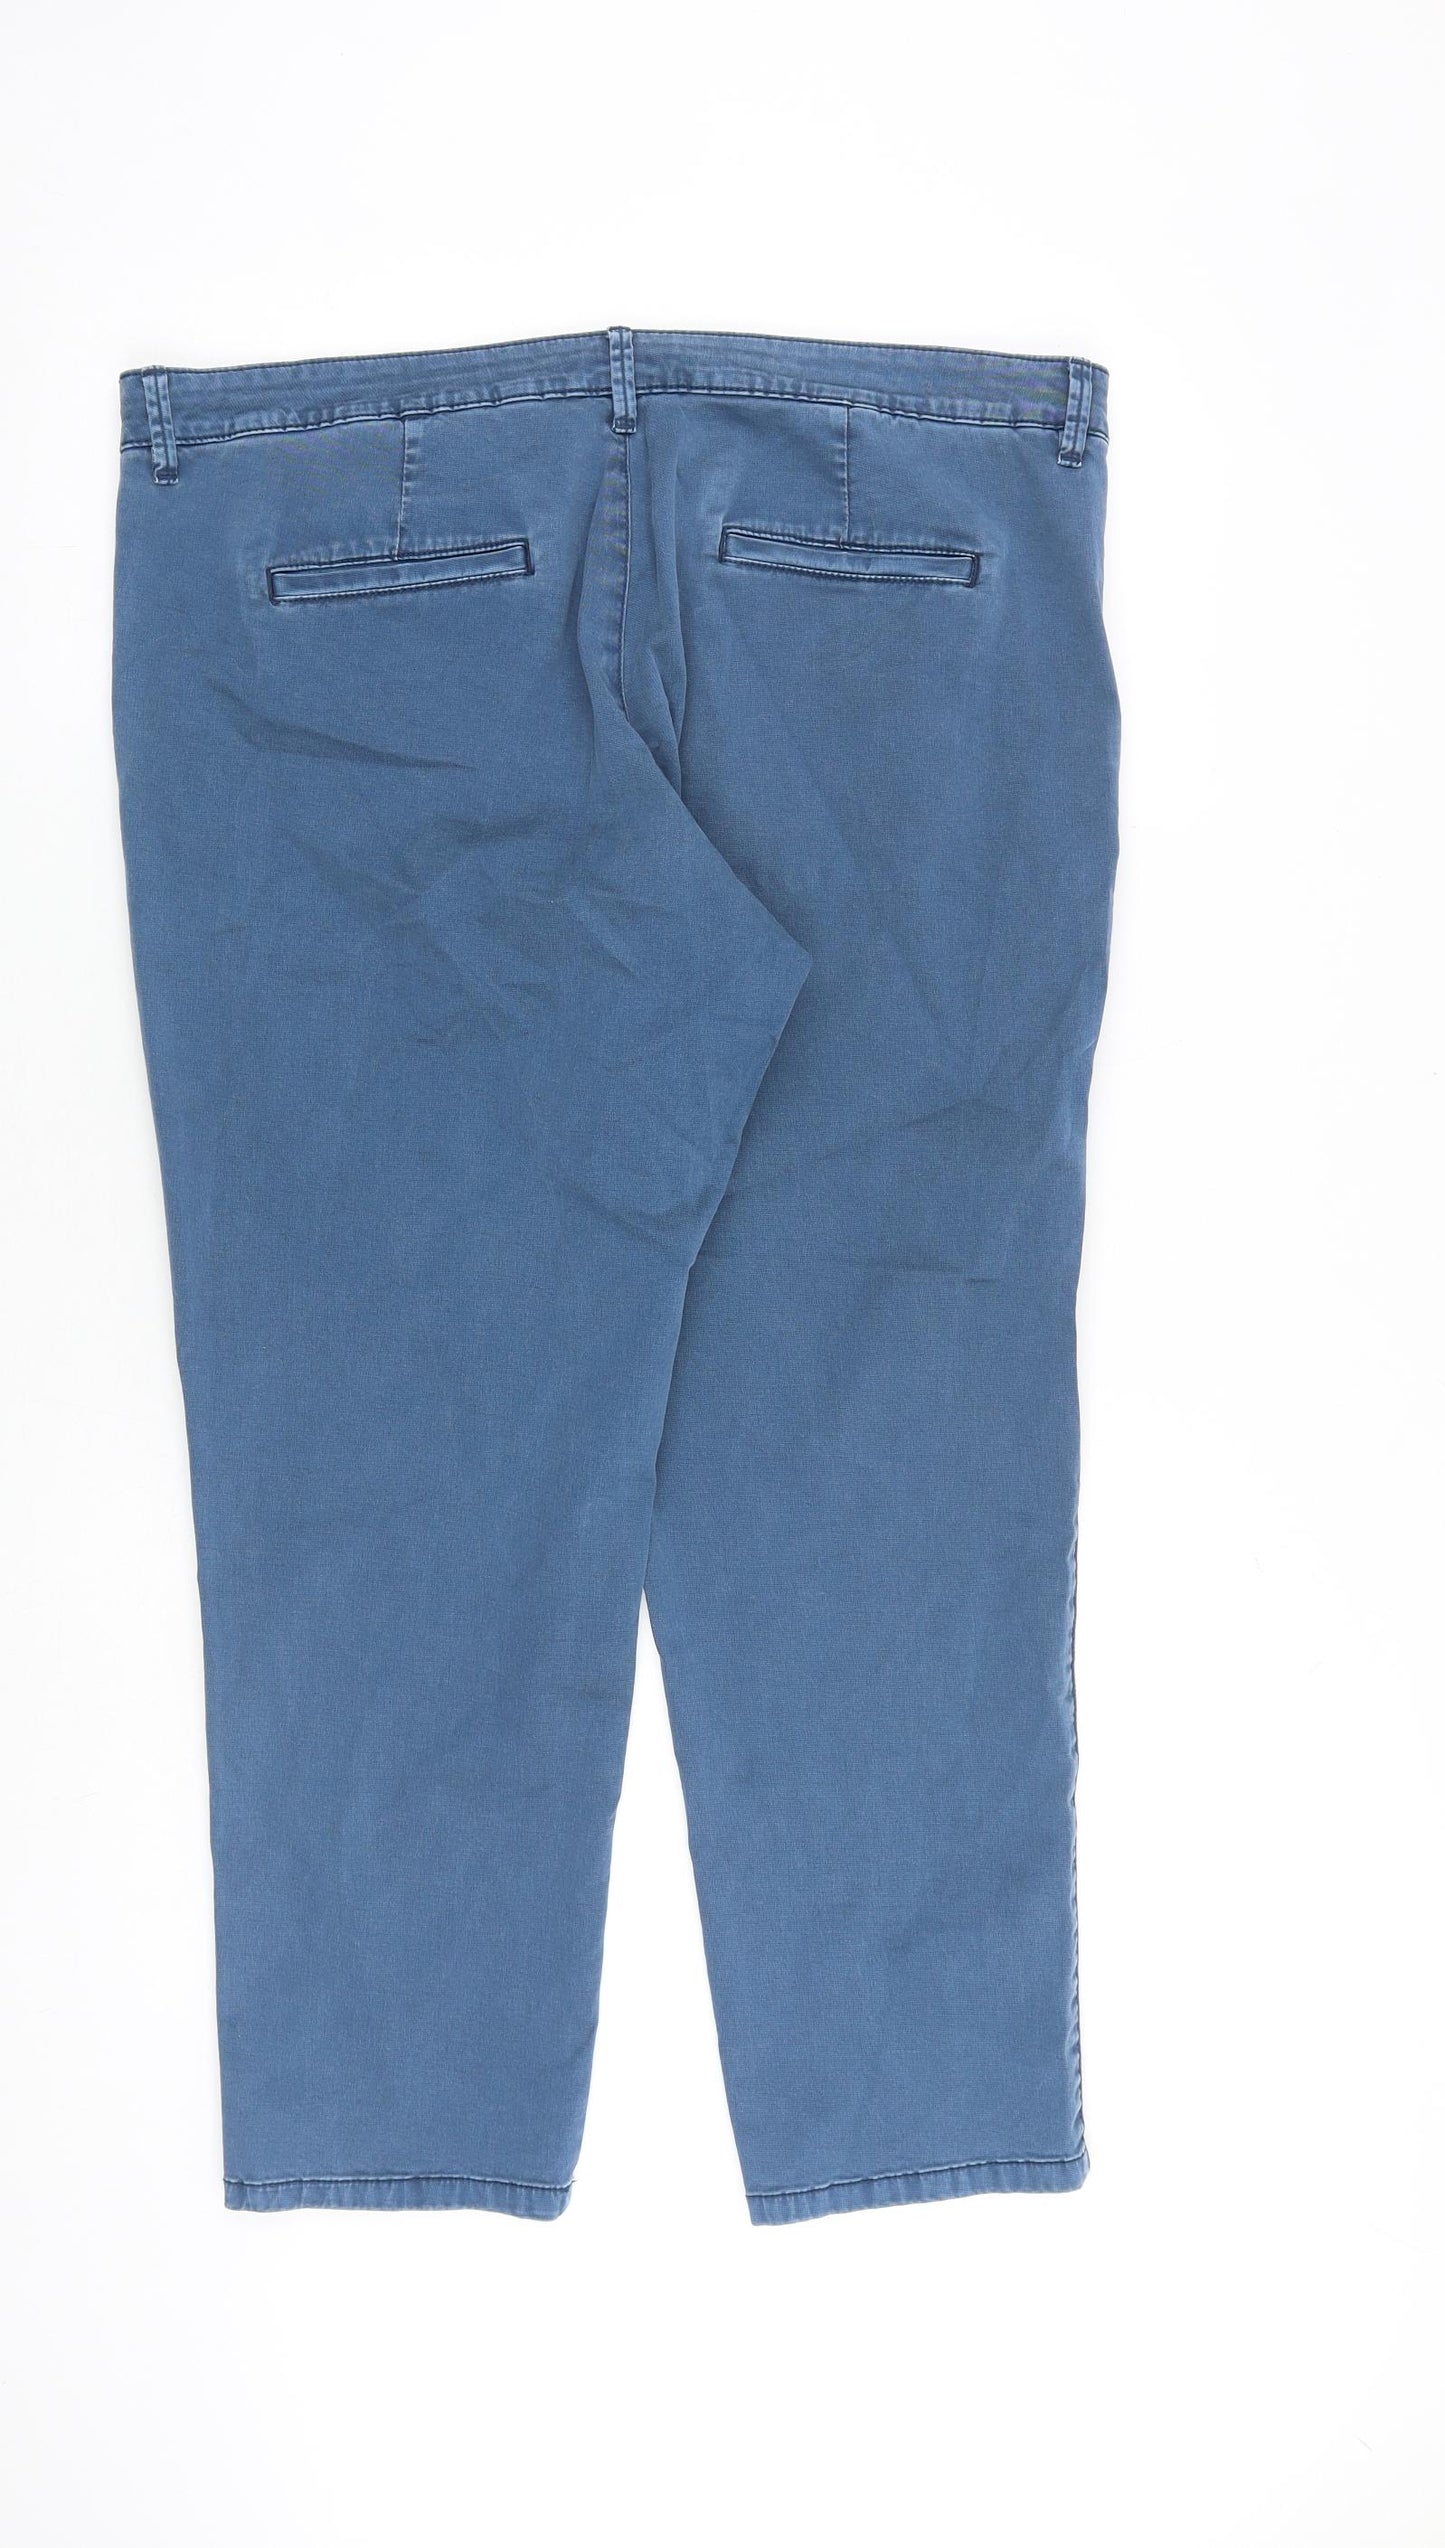 MANTARAY PRODUCTS Womens Blue Cotton Trousers Size 16 L28 in Regular Zip